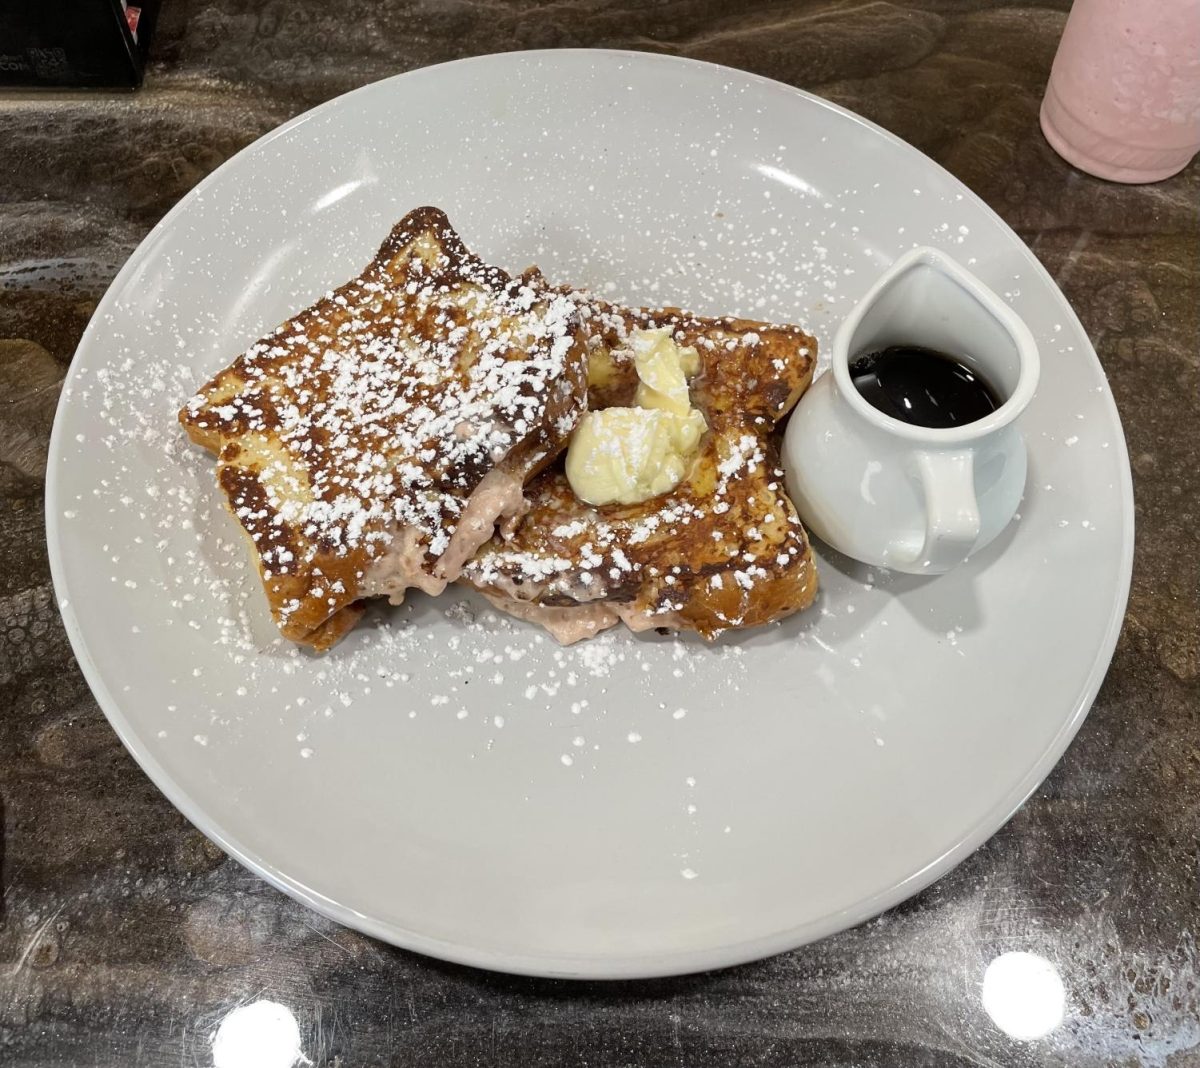 The Daily Grind Coffee Co. offers a variety of breakfast and brunch meals. Their stuffed french toast puts a great twist on a breakfast classic, filling french toast with strawberry or blueberry cream cheese. 